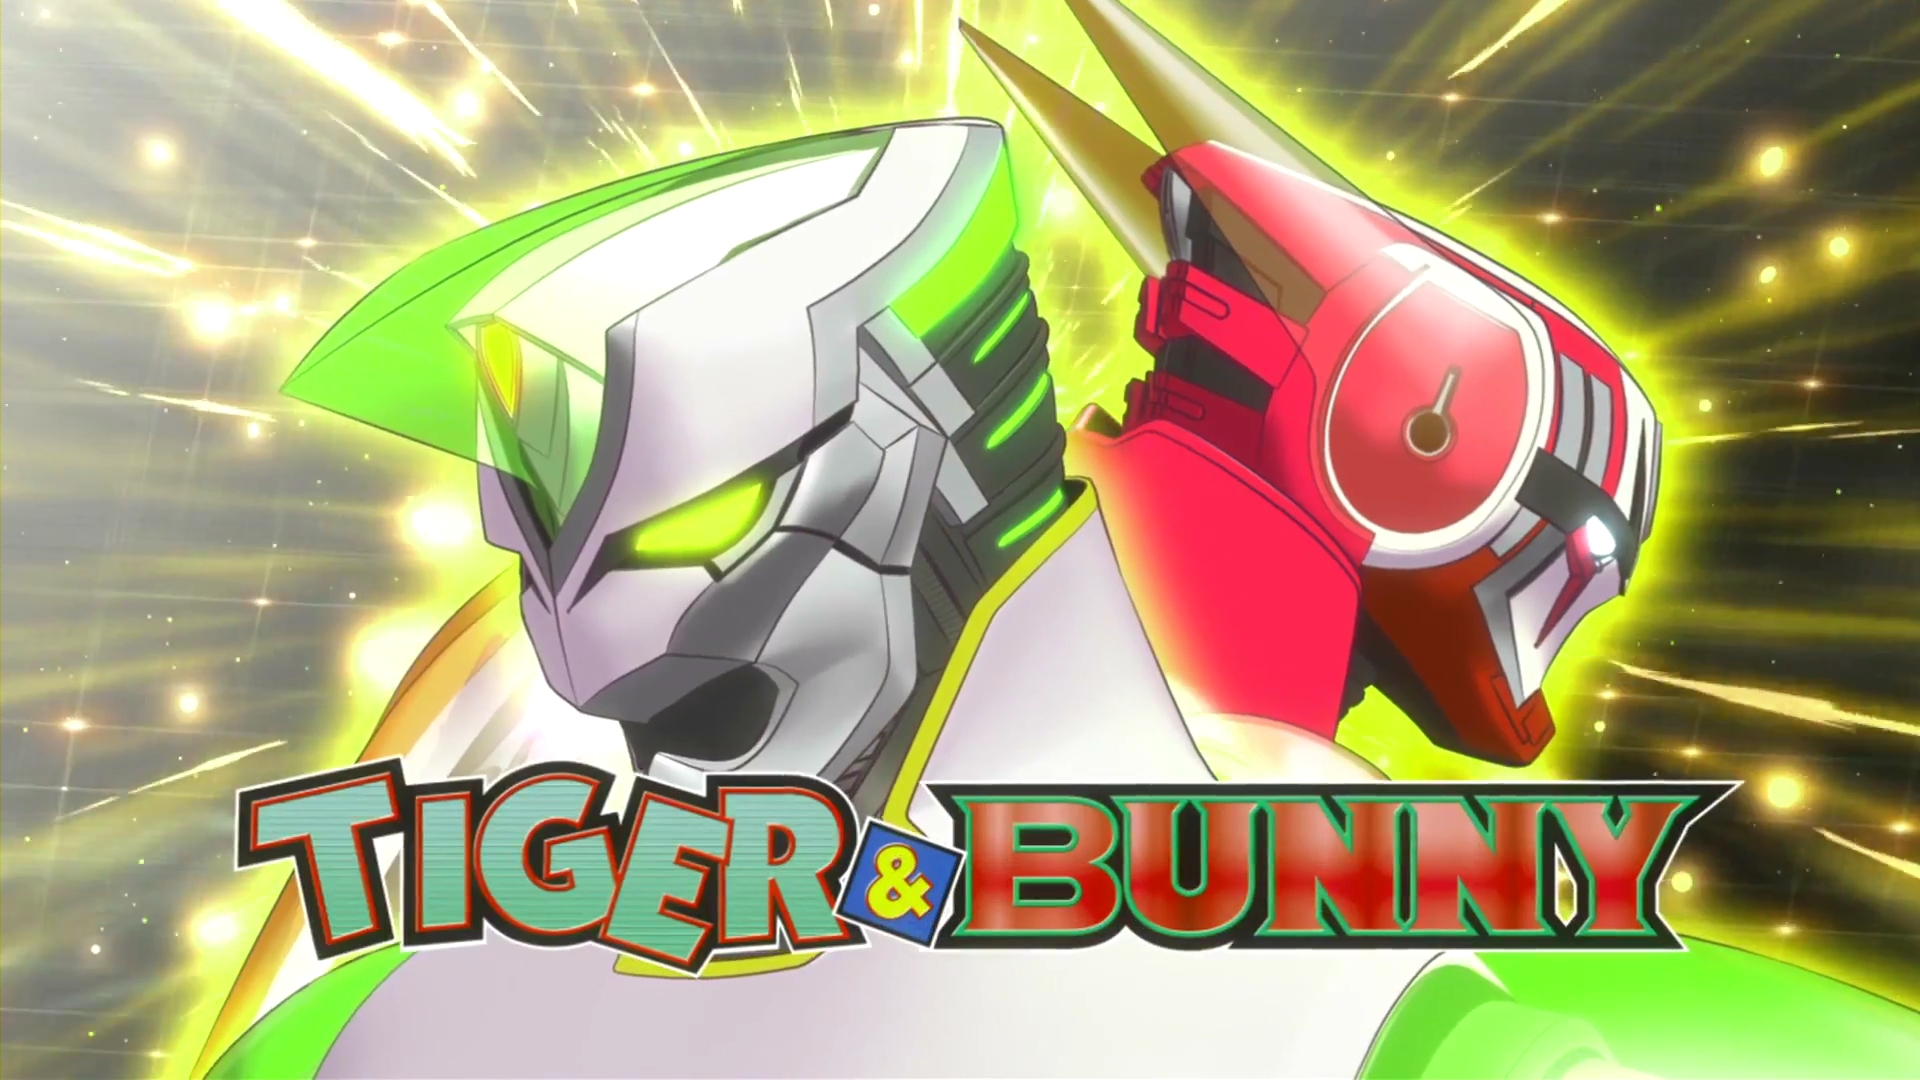 Tiger & Bunny Backgrounds, Compatible - PC, Mobile, Gadgets| 1920x1080 px